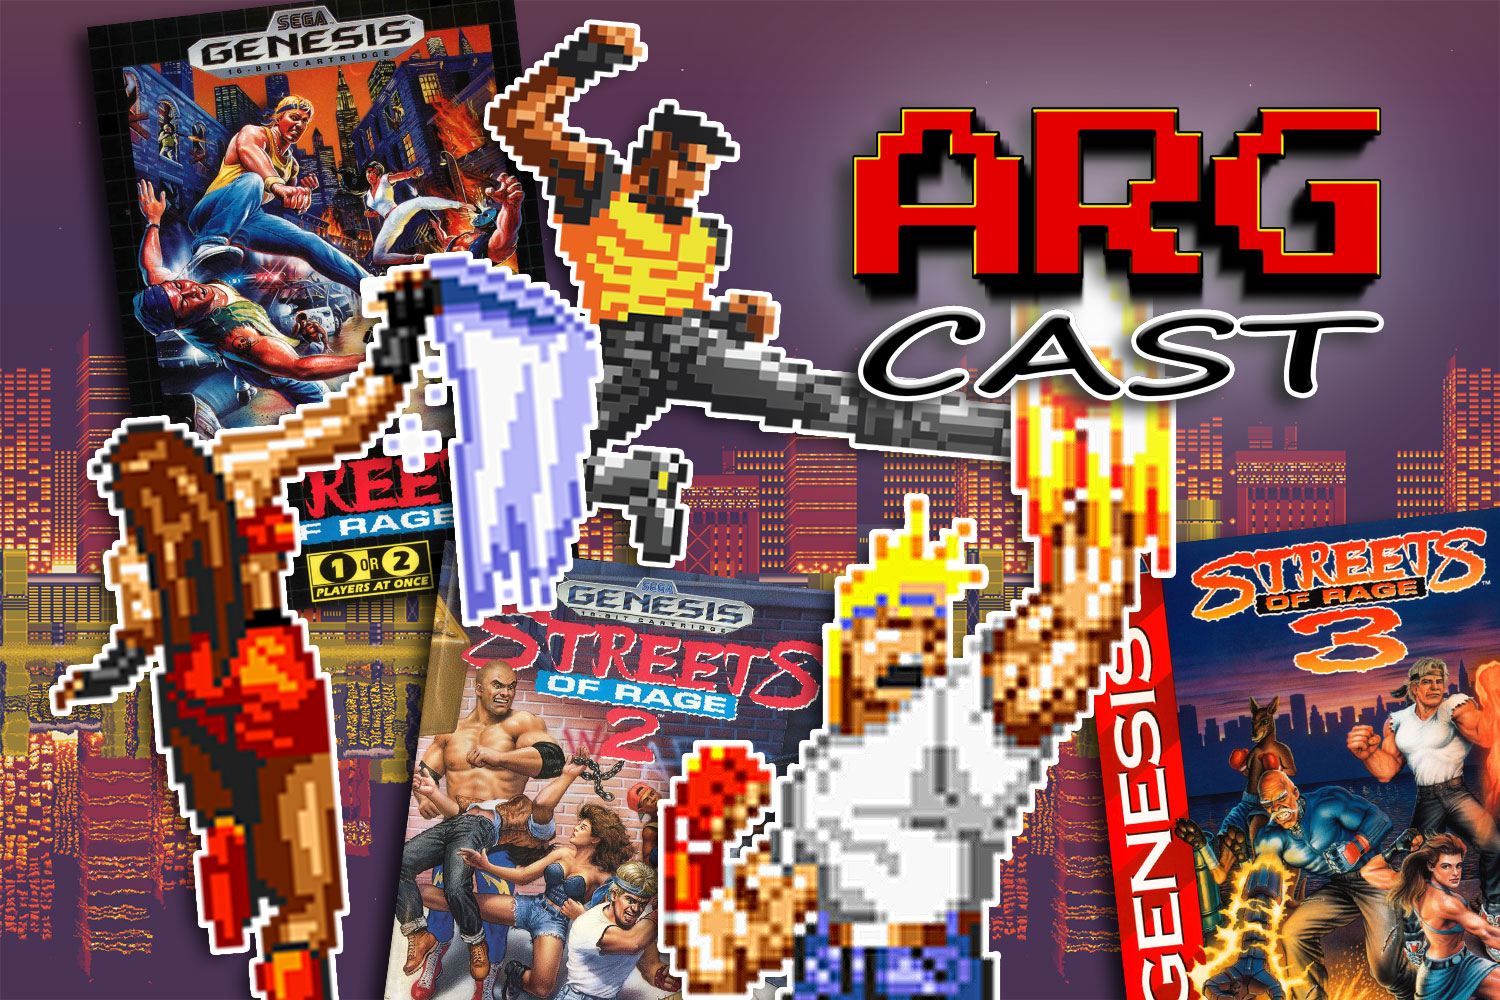 ARGcast #205: Rumbling in Streets of Rage w/ Tony Polanco, Chris Sealy